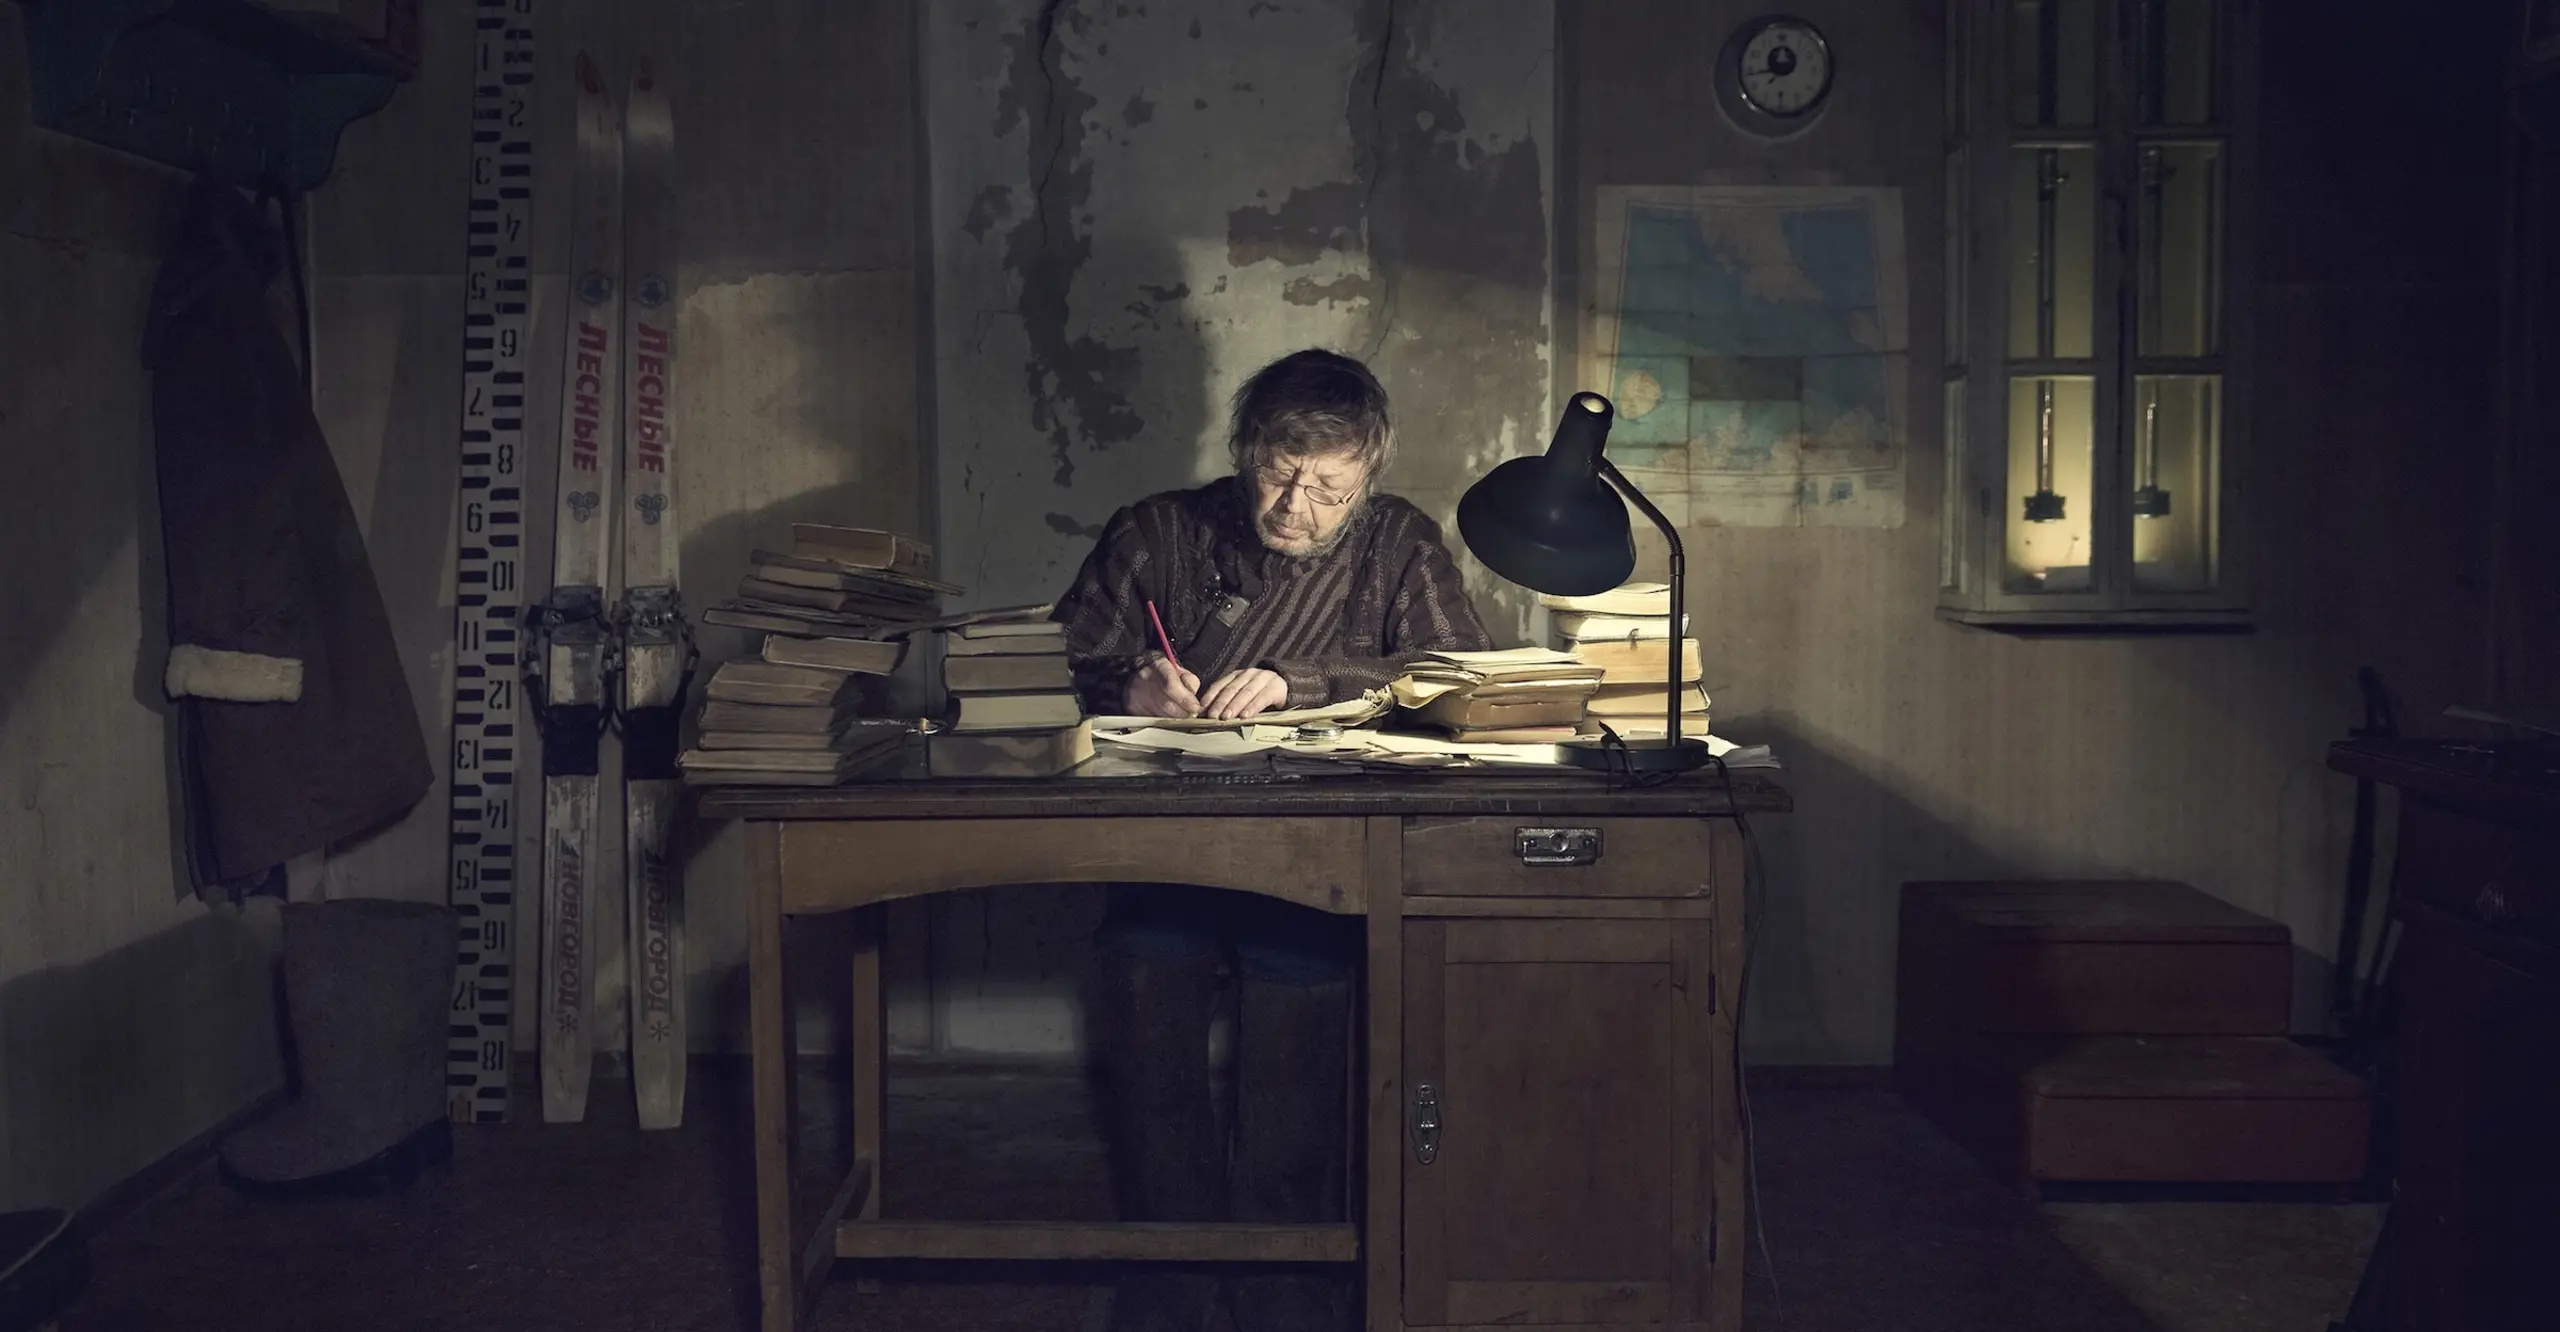 A man sits at a desk in a dark room.